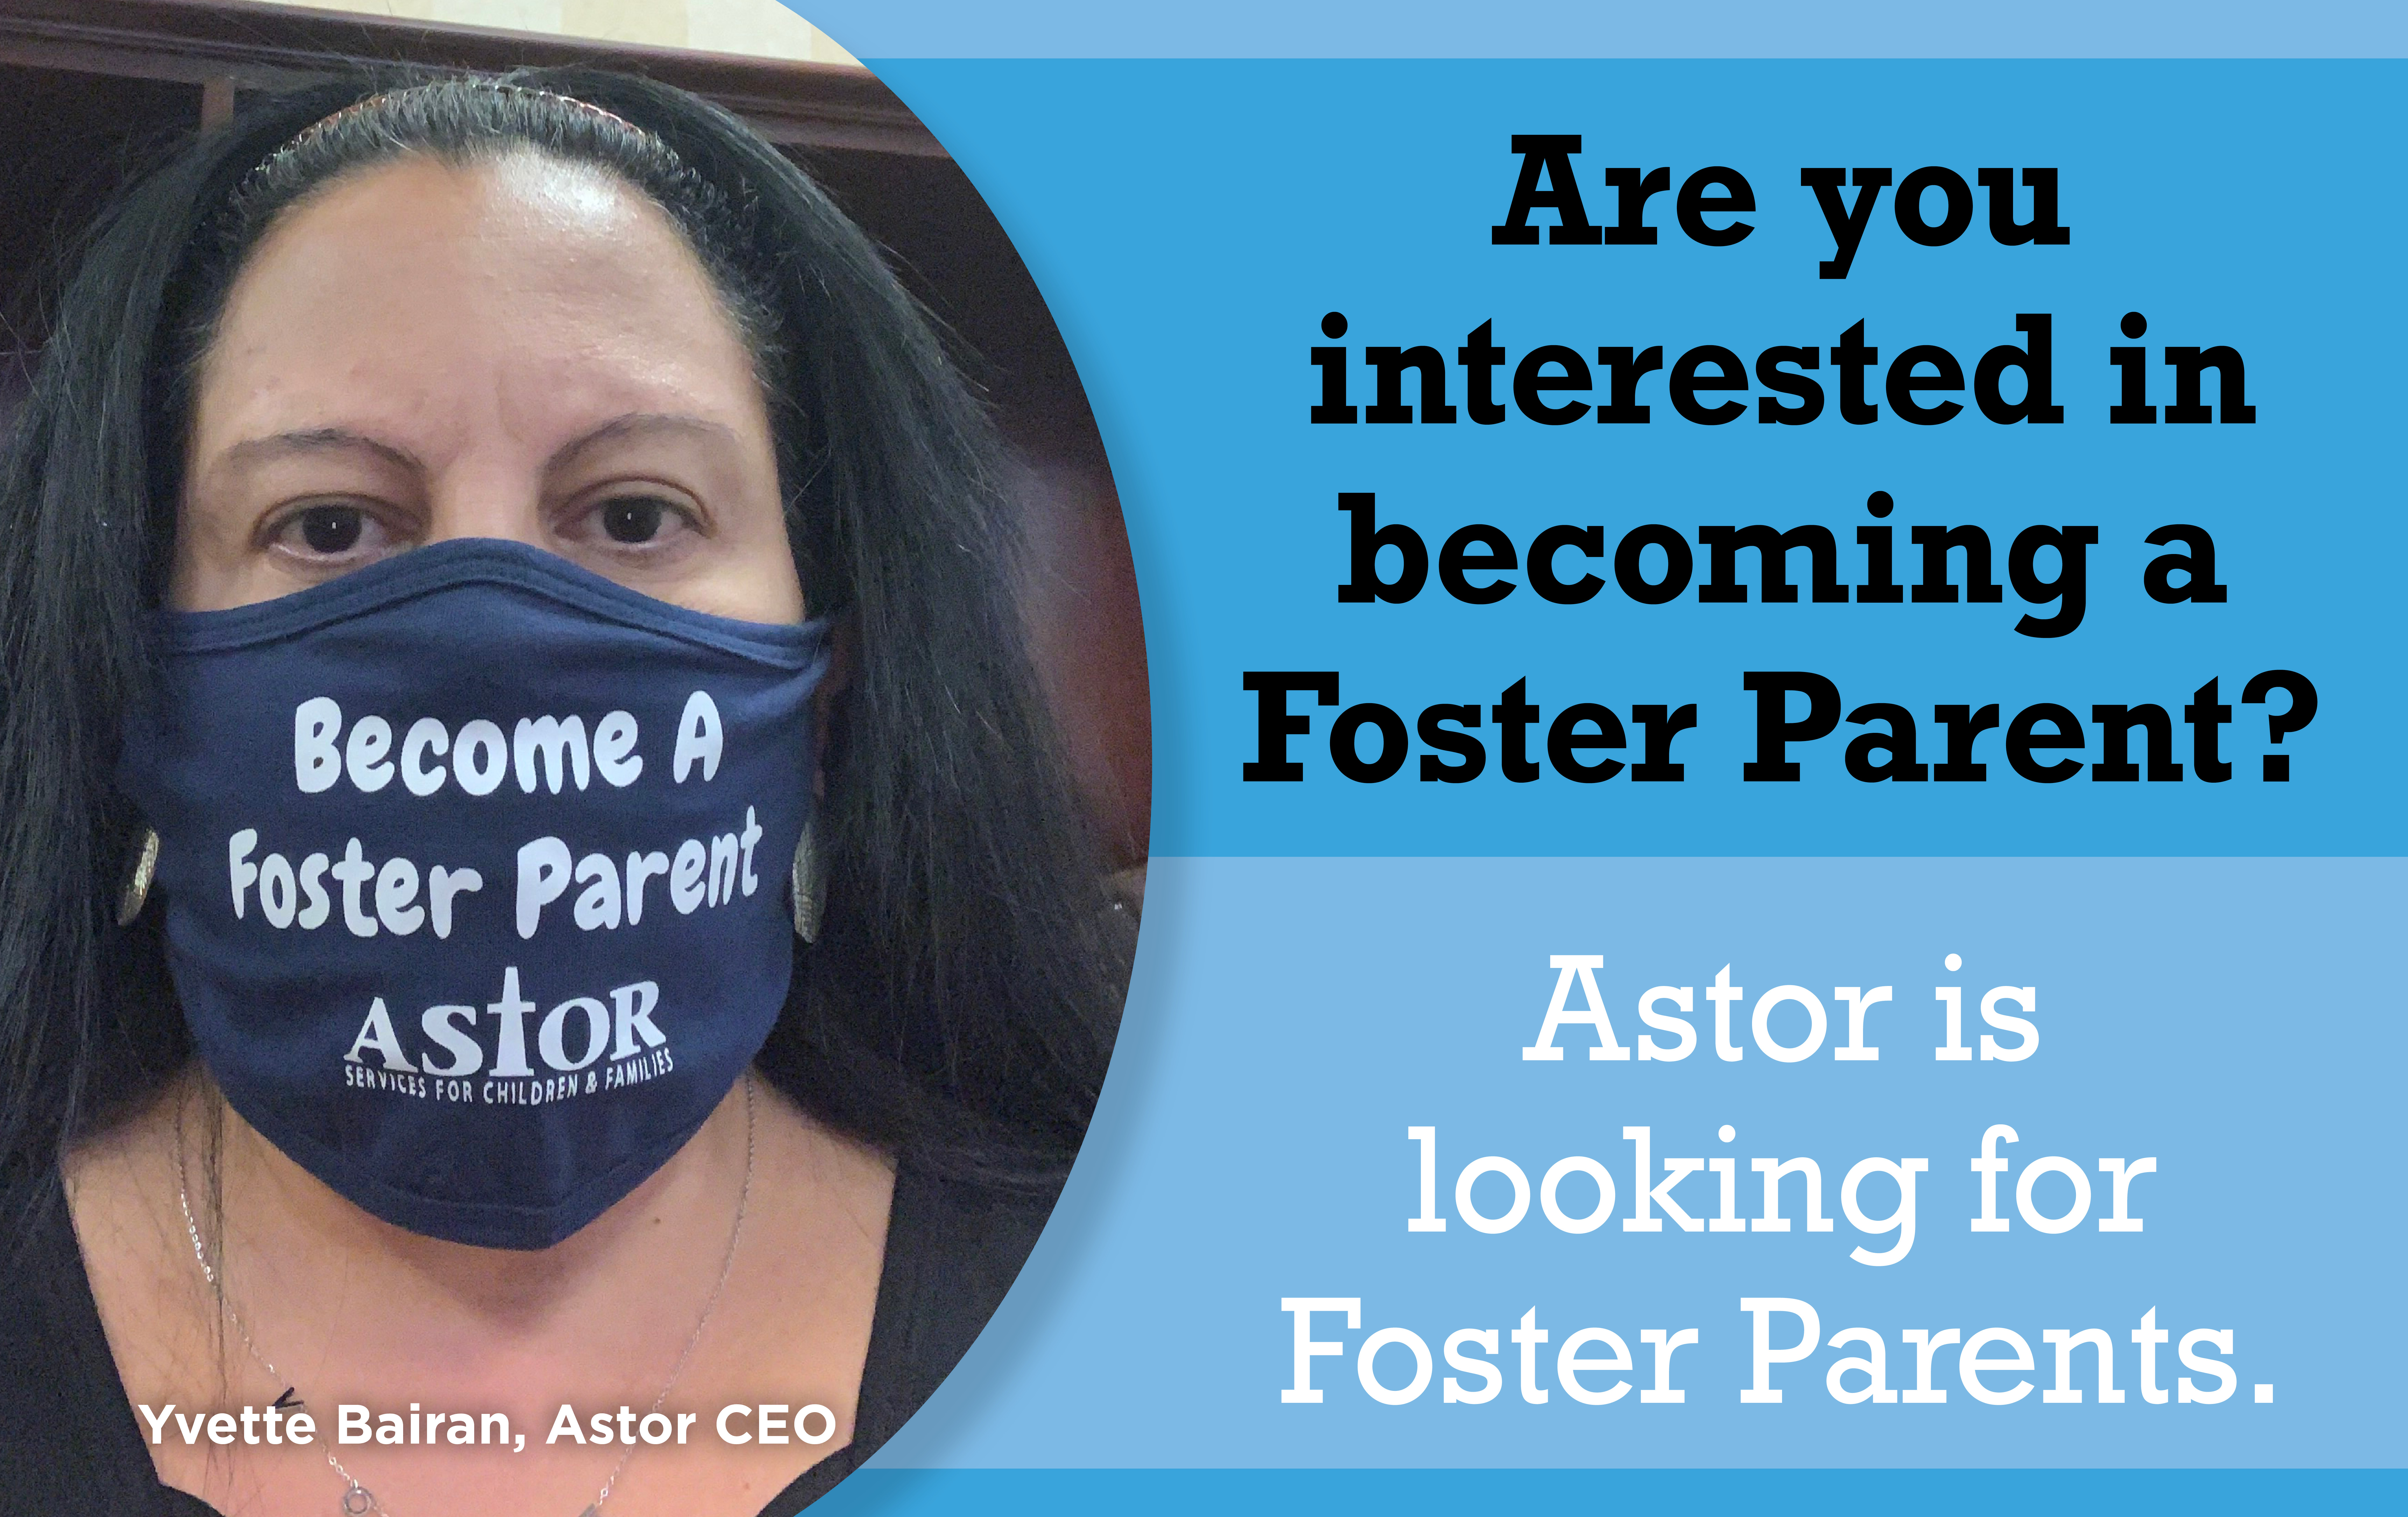 Foster Parents Wanted